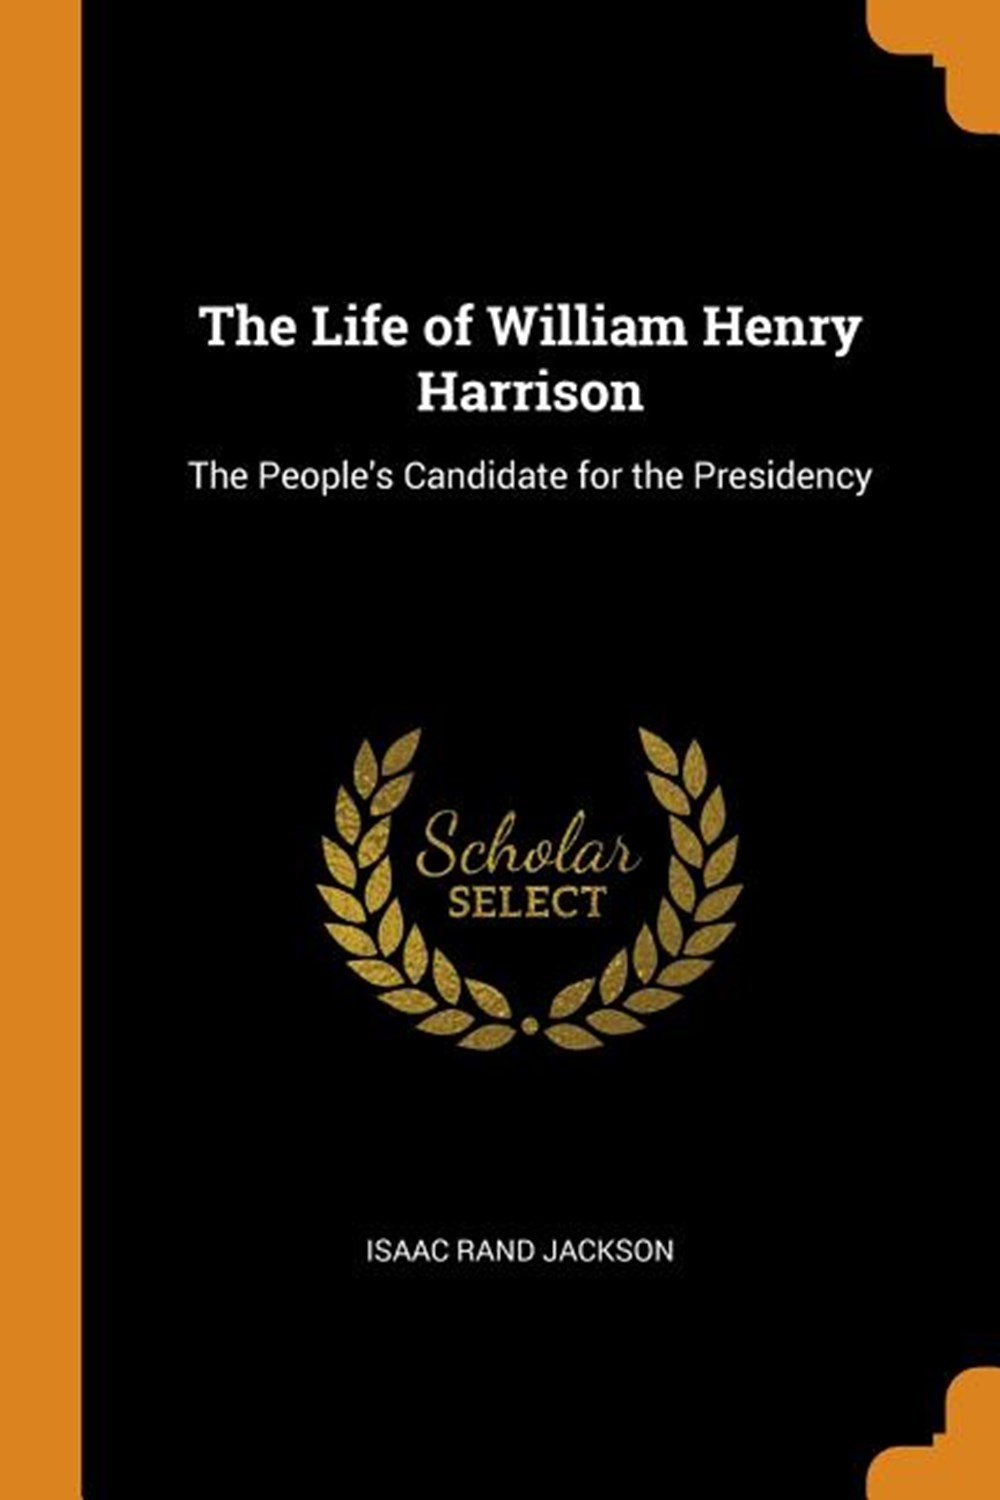 Life of William Henry Harrison The People's Candidate for the Presidency